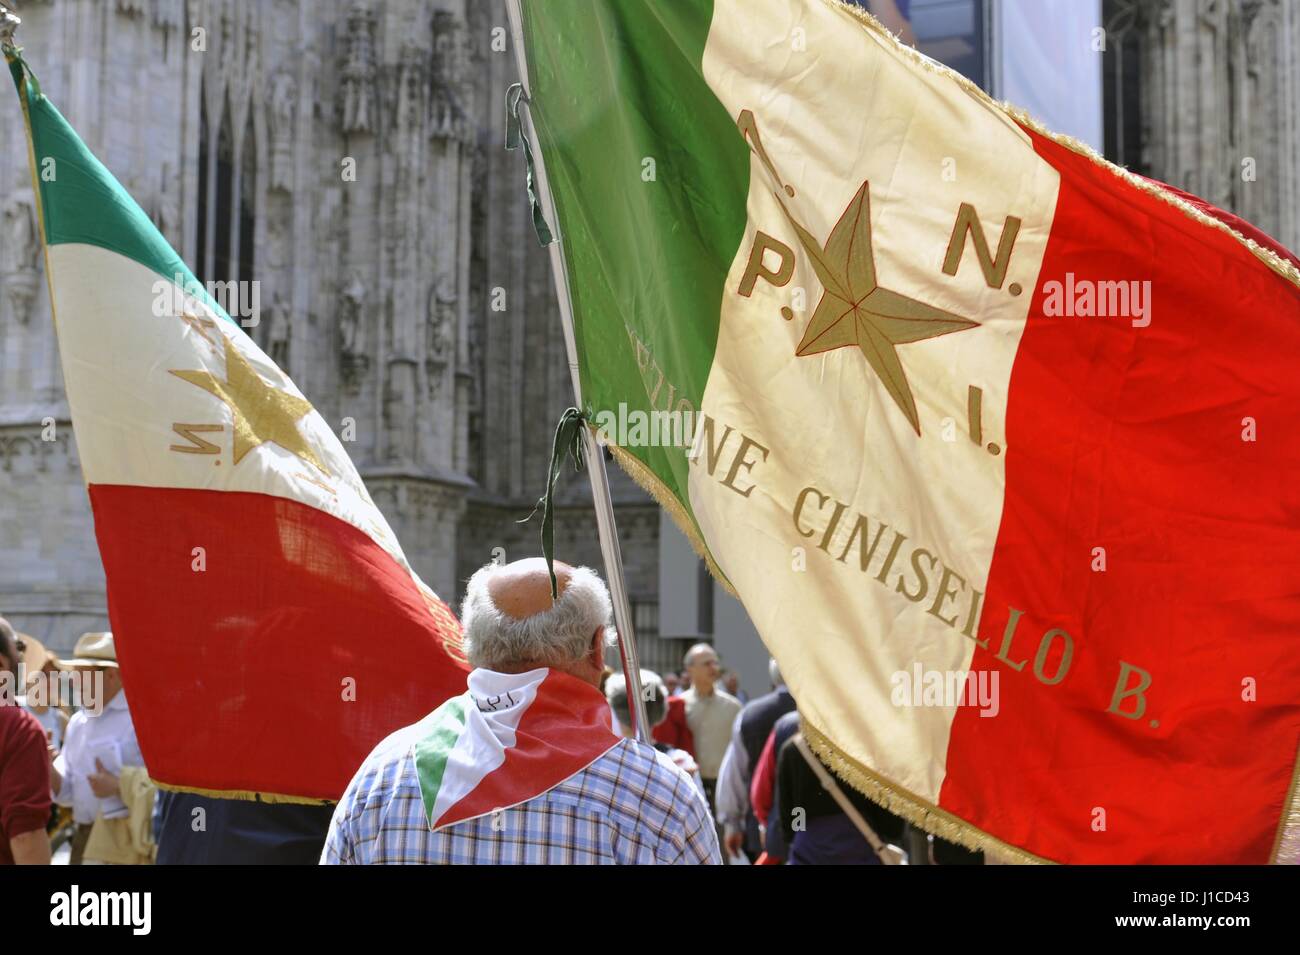 The 25th of April is celebrated annually throughout Italy with feasts and demonstrations to remember the liberation from Nazi-fascism. Stock Photo